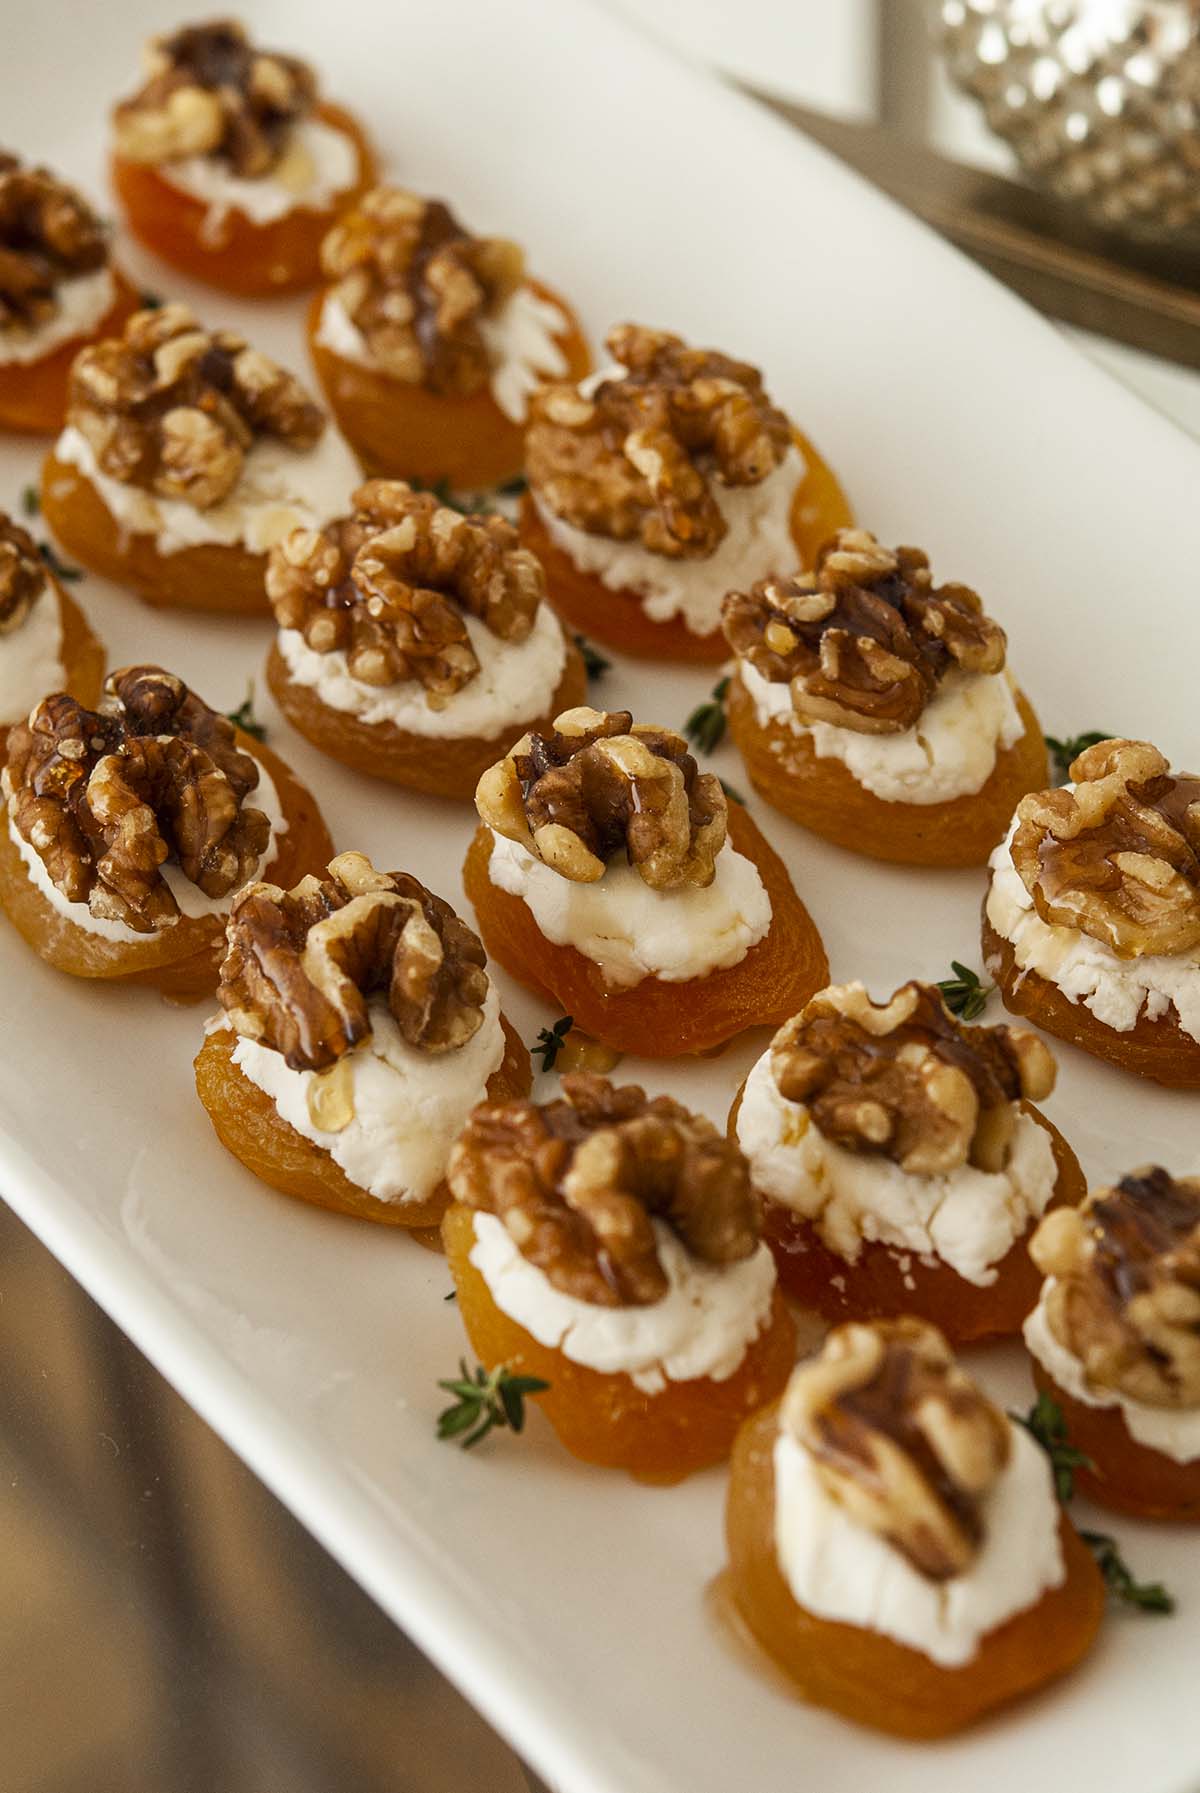 About 16 apricot appetizers with cheese and nuts on a plate.